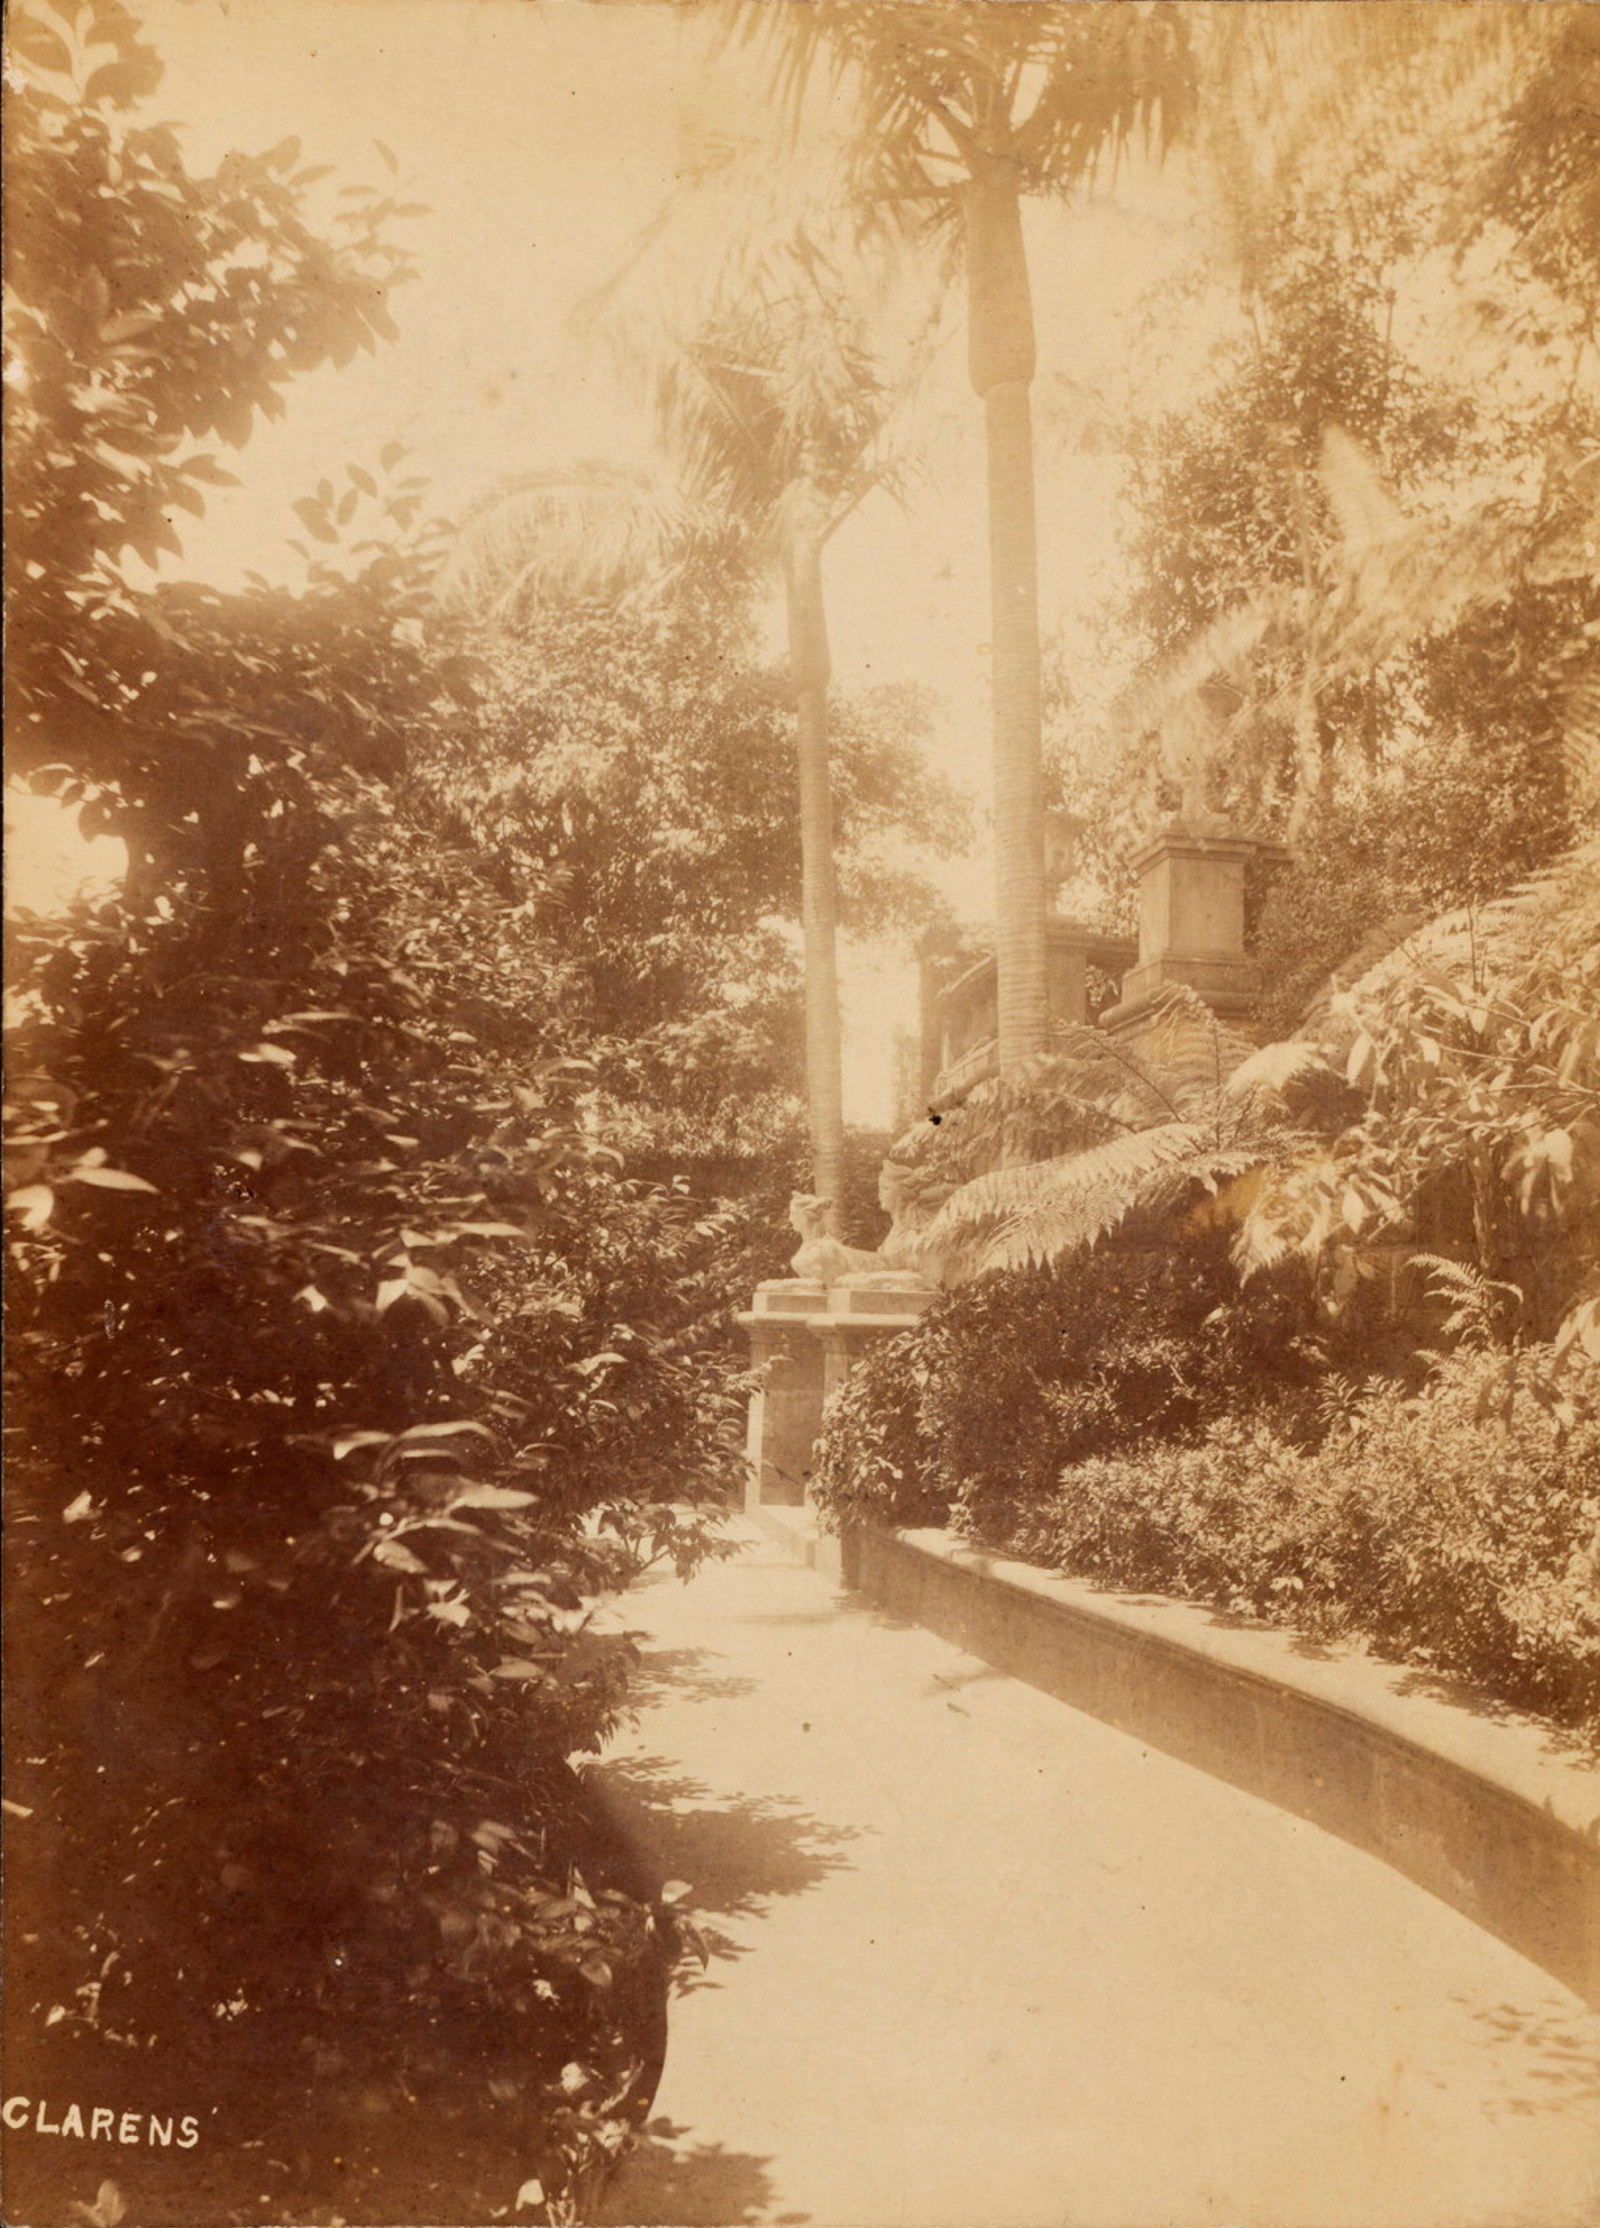 Sphinxes at foot of flight of stairs, Clarens, 1892-93